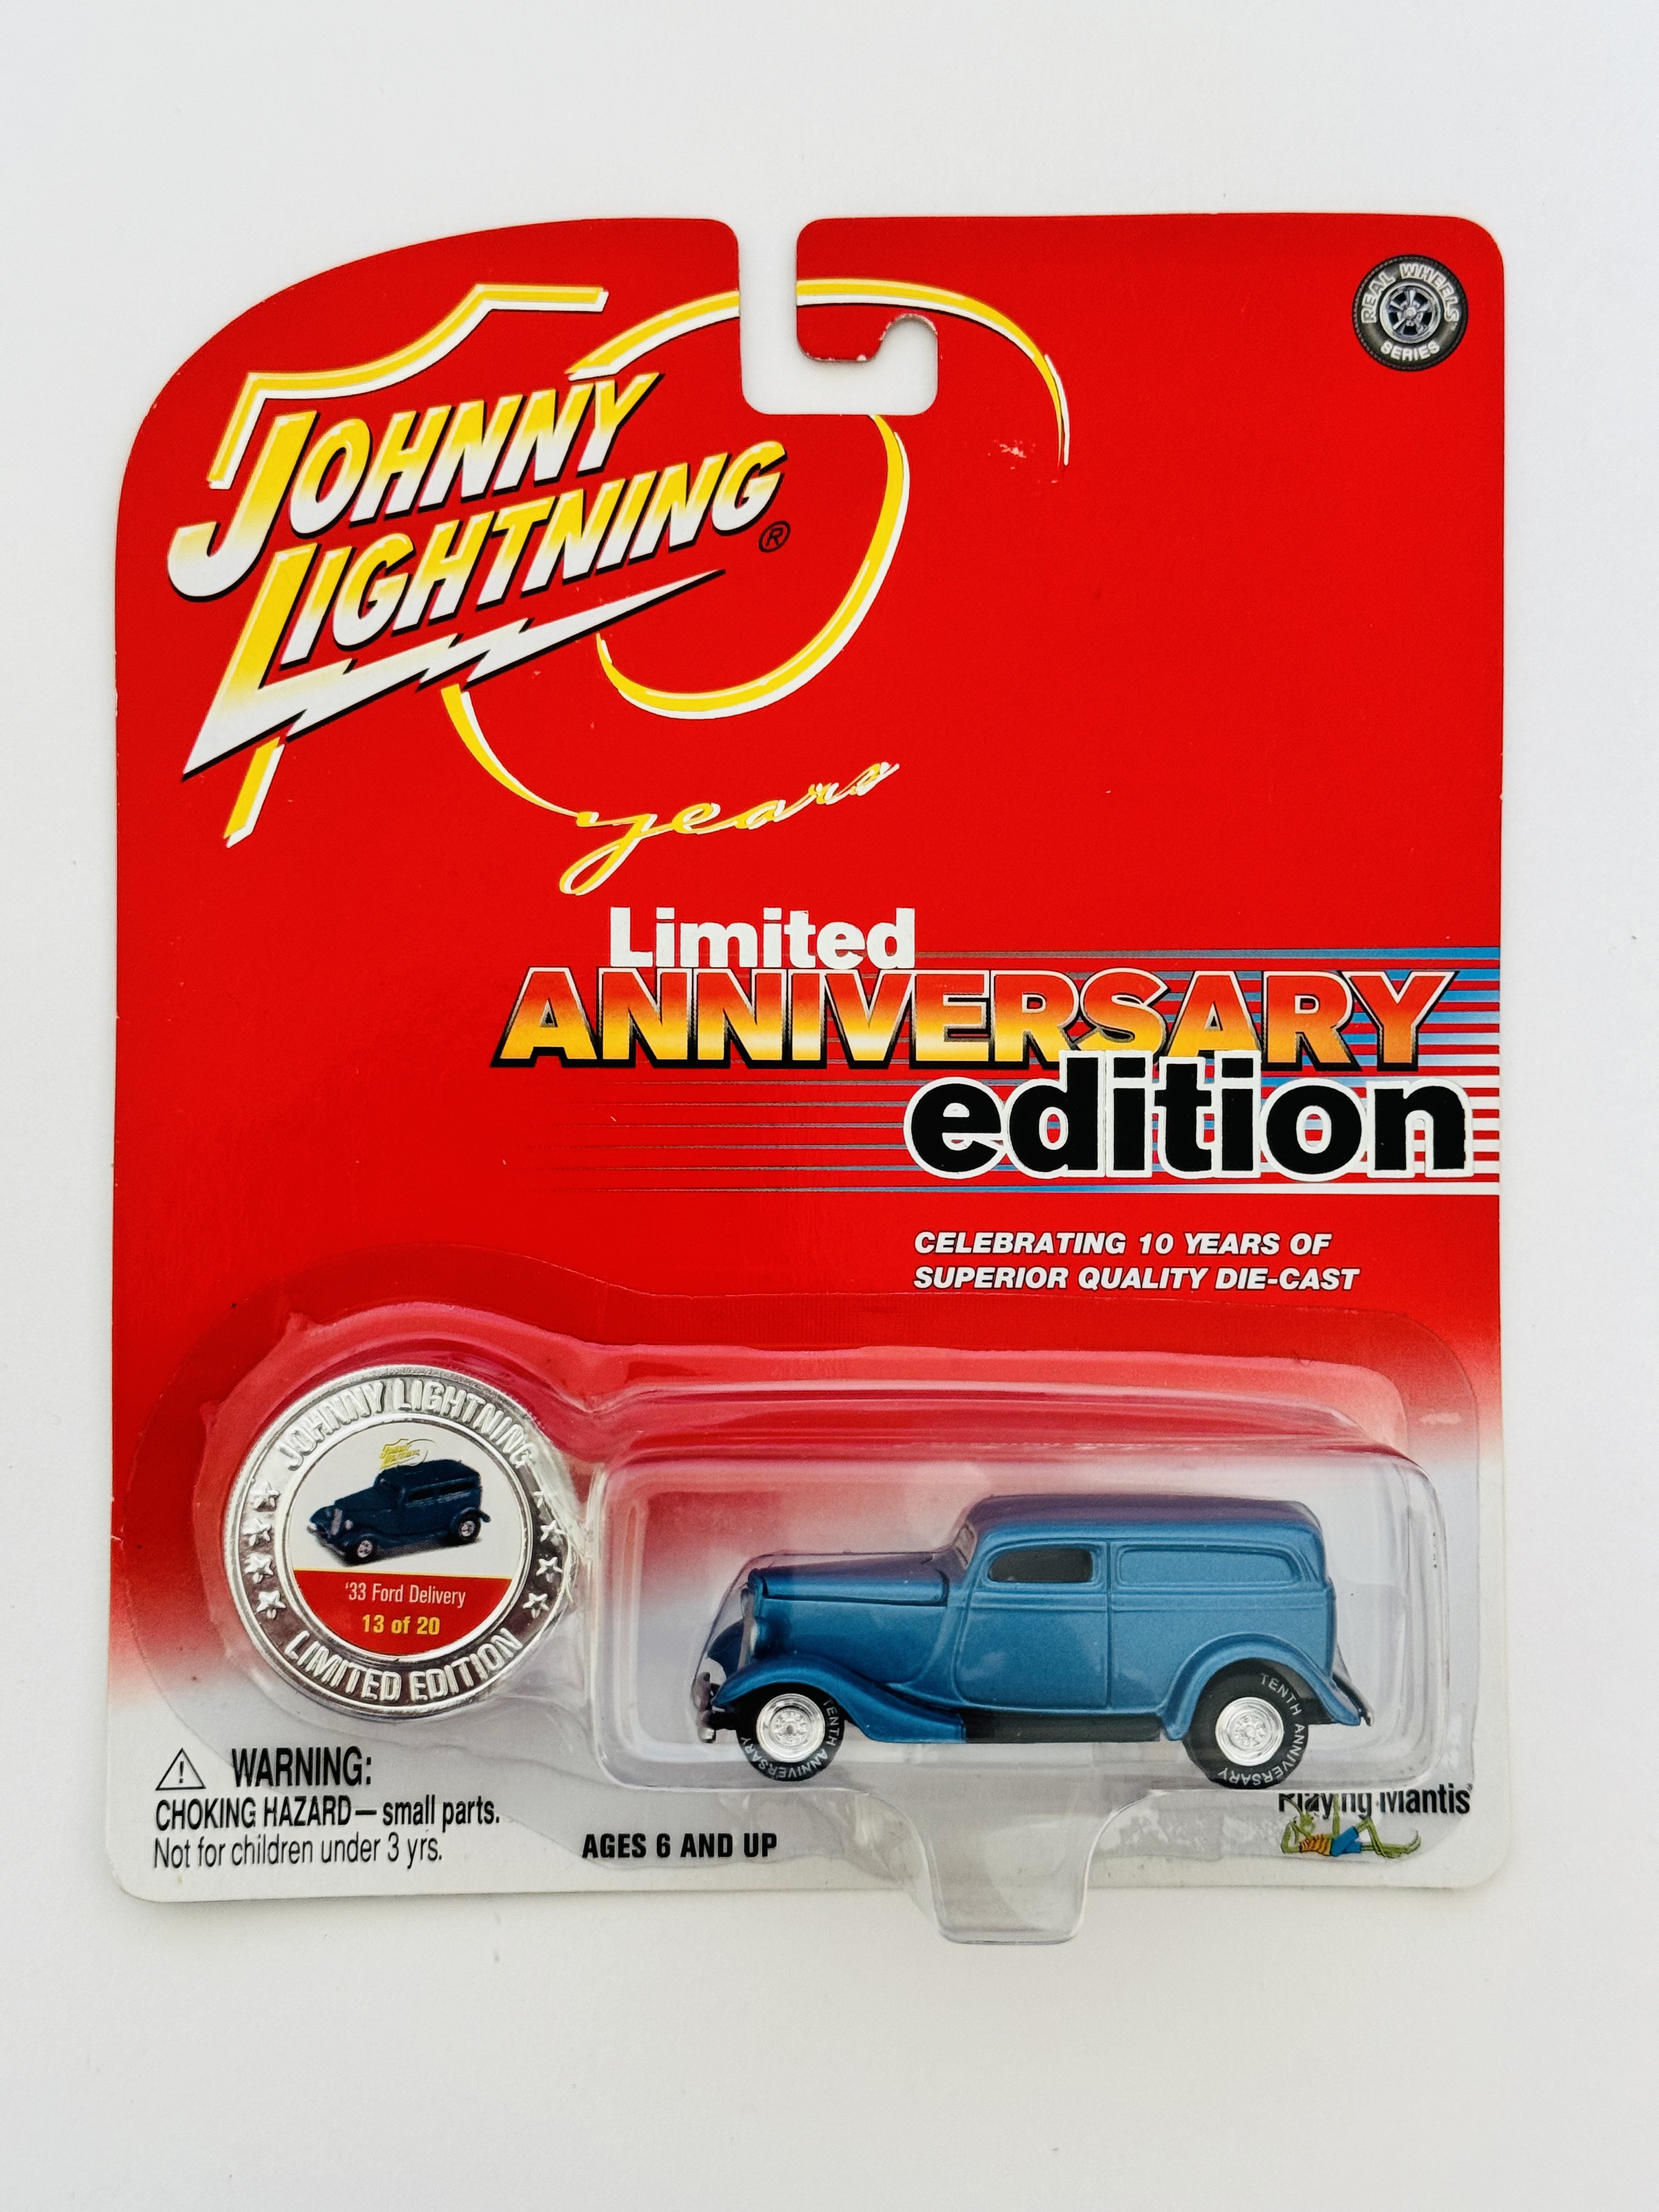 Johnny Lightning Anniversary Edition '33 Ford Delivery